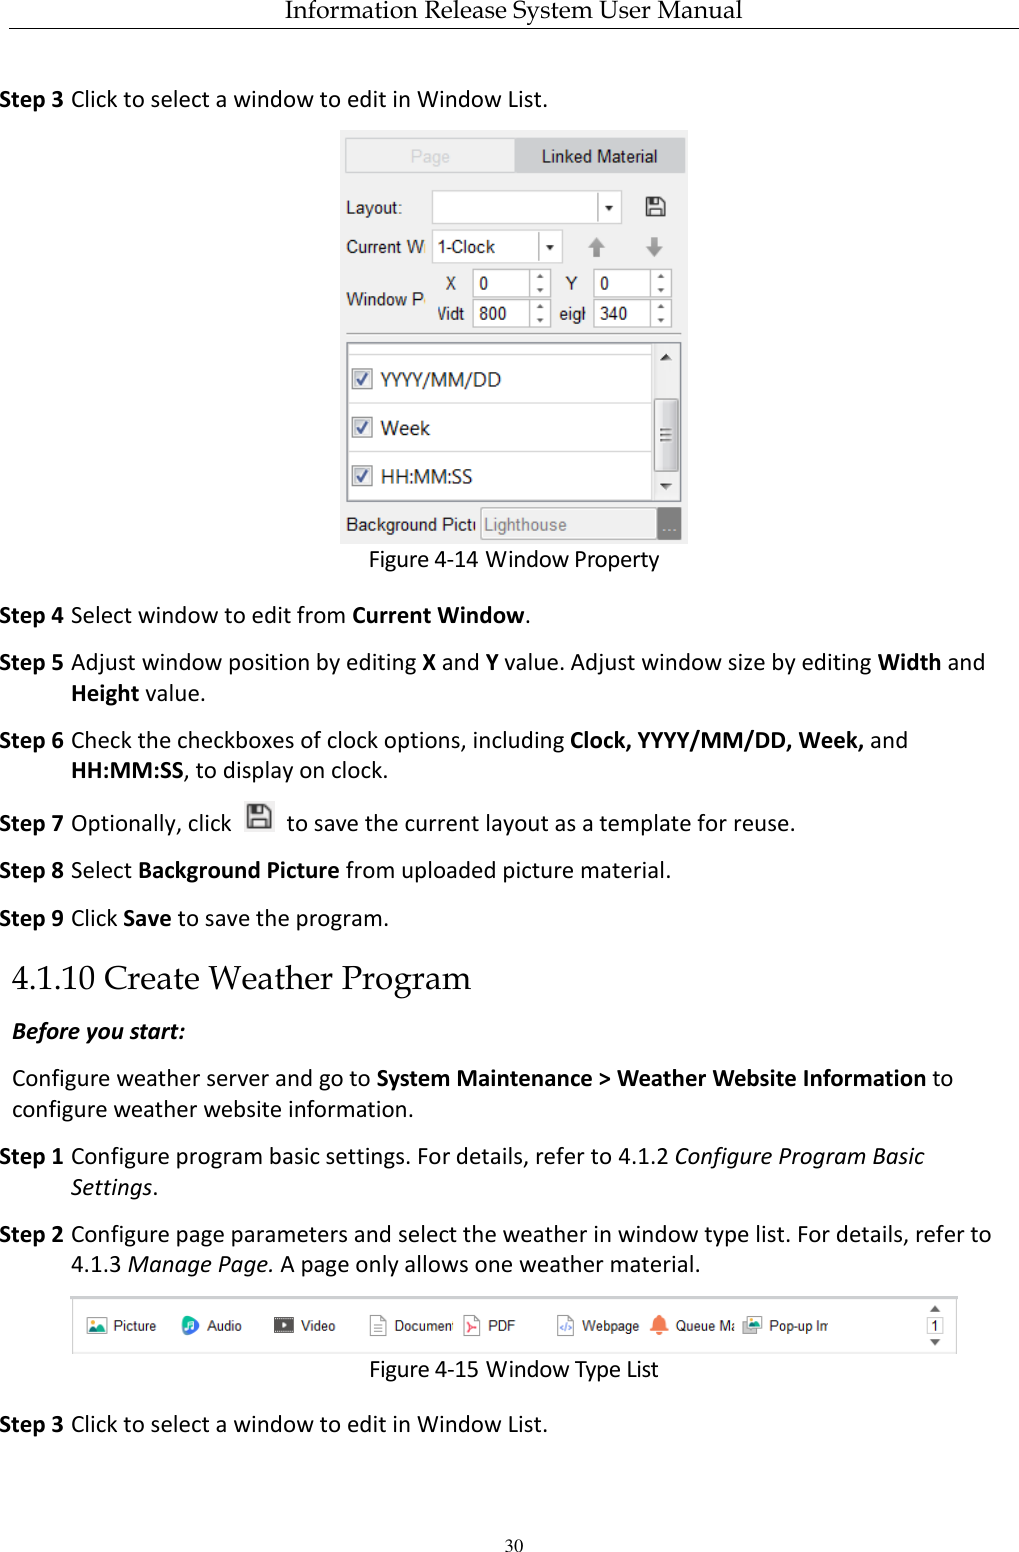 Information Release System User Manual 30 Step 3 Click to select a window to edit in Window List.  Figure 4-14 Window Property Step 4 Select window to edit from Current Window. Step 5 Adjust window position by editing X and Y value. Adjust window size by editing Width and Height value. Step 6 Check the checkboxes of clock options, including Clock, YYYY/MM/DD, Week, and HH:MM:SS, to display on clock. Step 7 Optionally, click    to save the current layout as a template for reuse. Step 8 Select Background Picture from uploaded picture material. Step 9 Click Save to save the program. 4.1.10 Create Weather Program Before you start: Configure weather server and go to System Maintenance &gt; Weather Website Information to configure weather website information.   Step 1 Configure program basic settings. For details, refer to 4.1.2 Configure Program Basic Settings. Step 2 Configure page parameters and select the weather in window type list. For details, refer to 4.1.3 Manage Page. A page only allows one weather material.  Figure 4-15 Window Type List Step 3 Click to select a window to edit in Window List. 